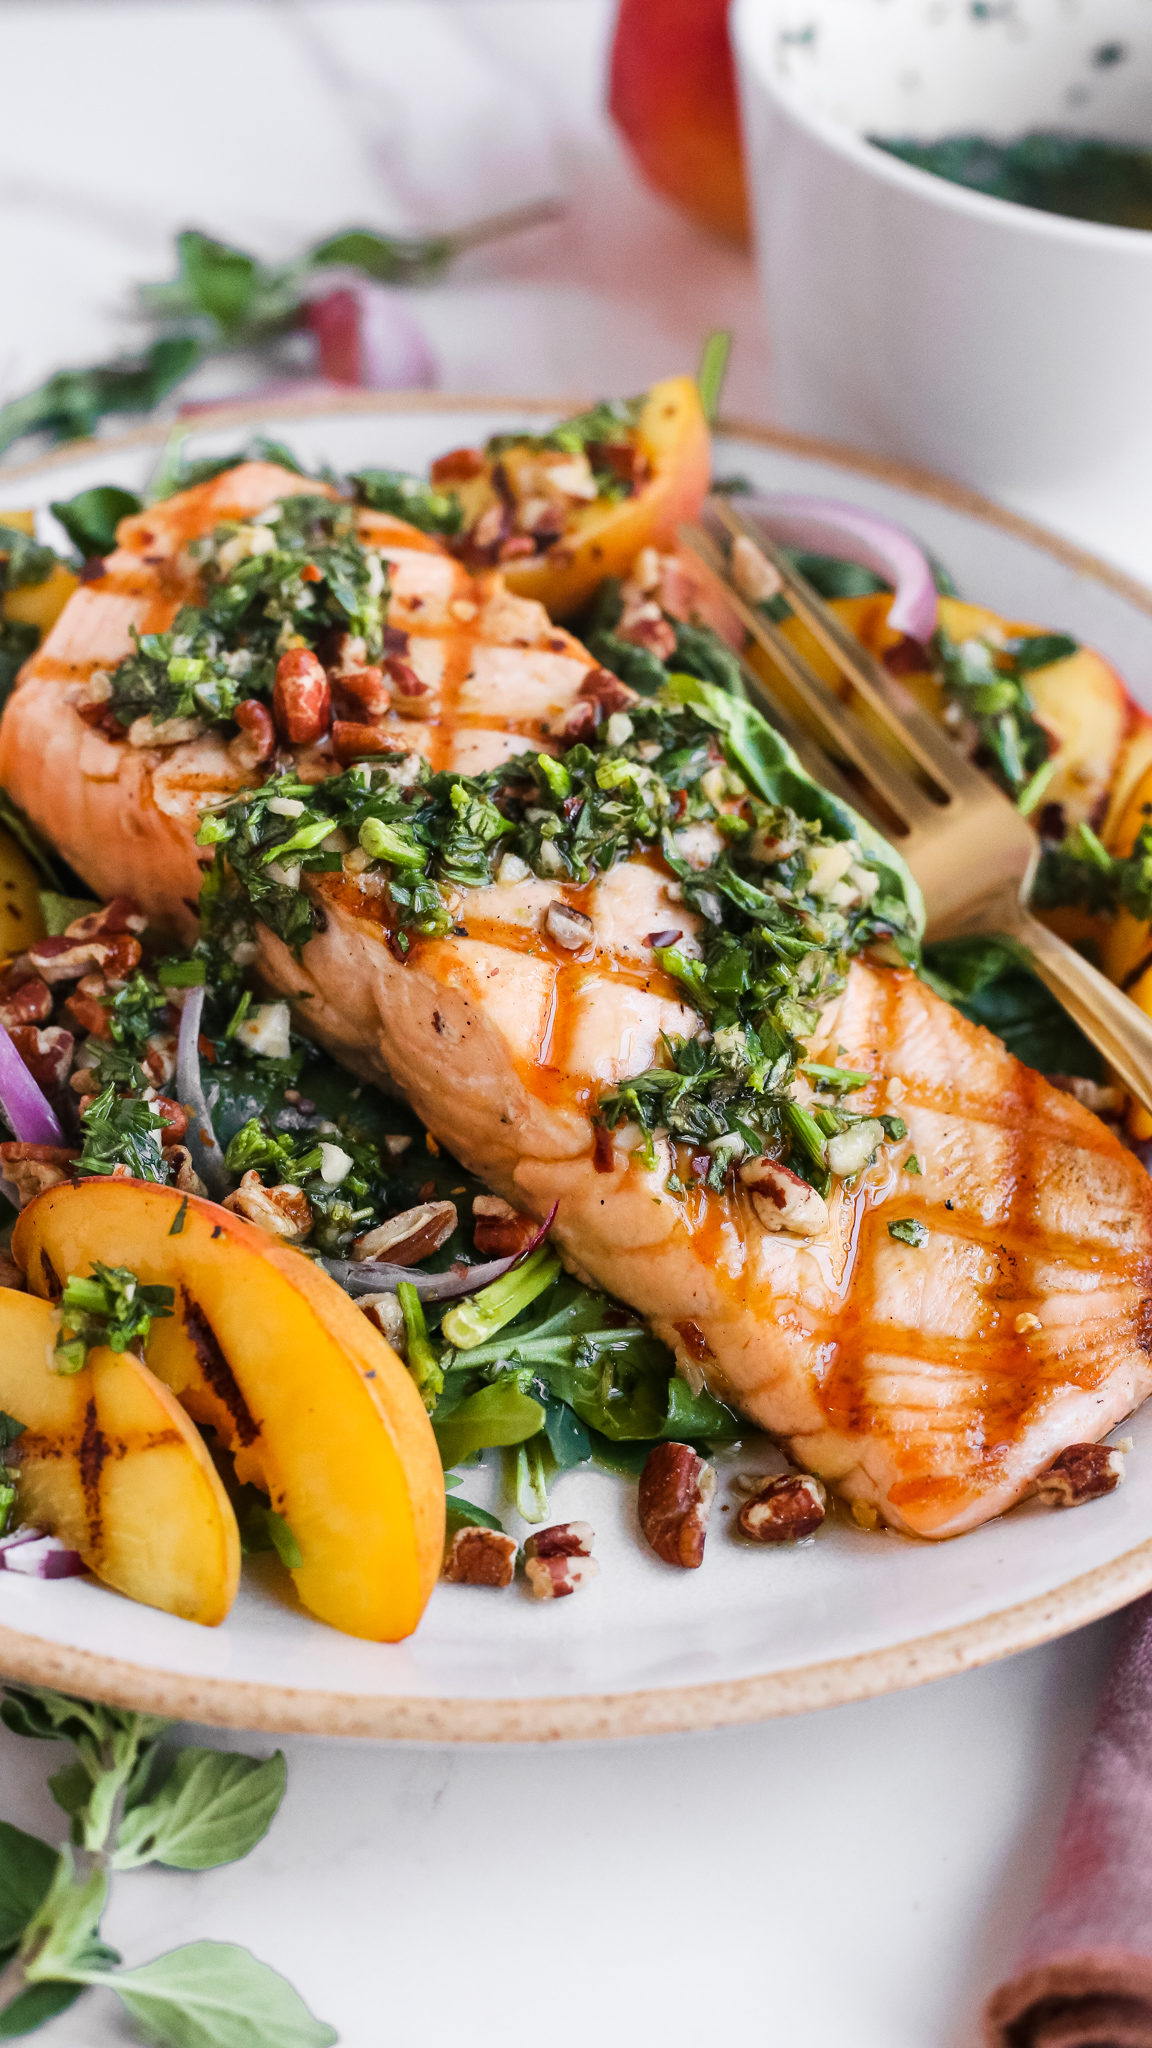 A close view of a grilled salmon fillet, served on a bed of salad greens and topped with grilled peaches, chopped pecans, sliced red onions, and a chimichurri sauce